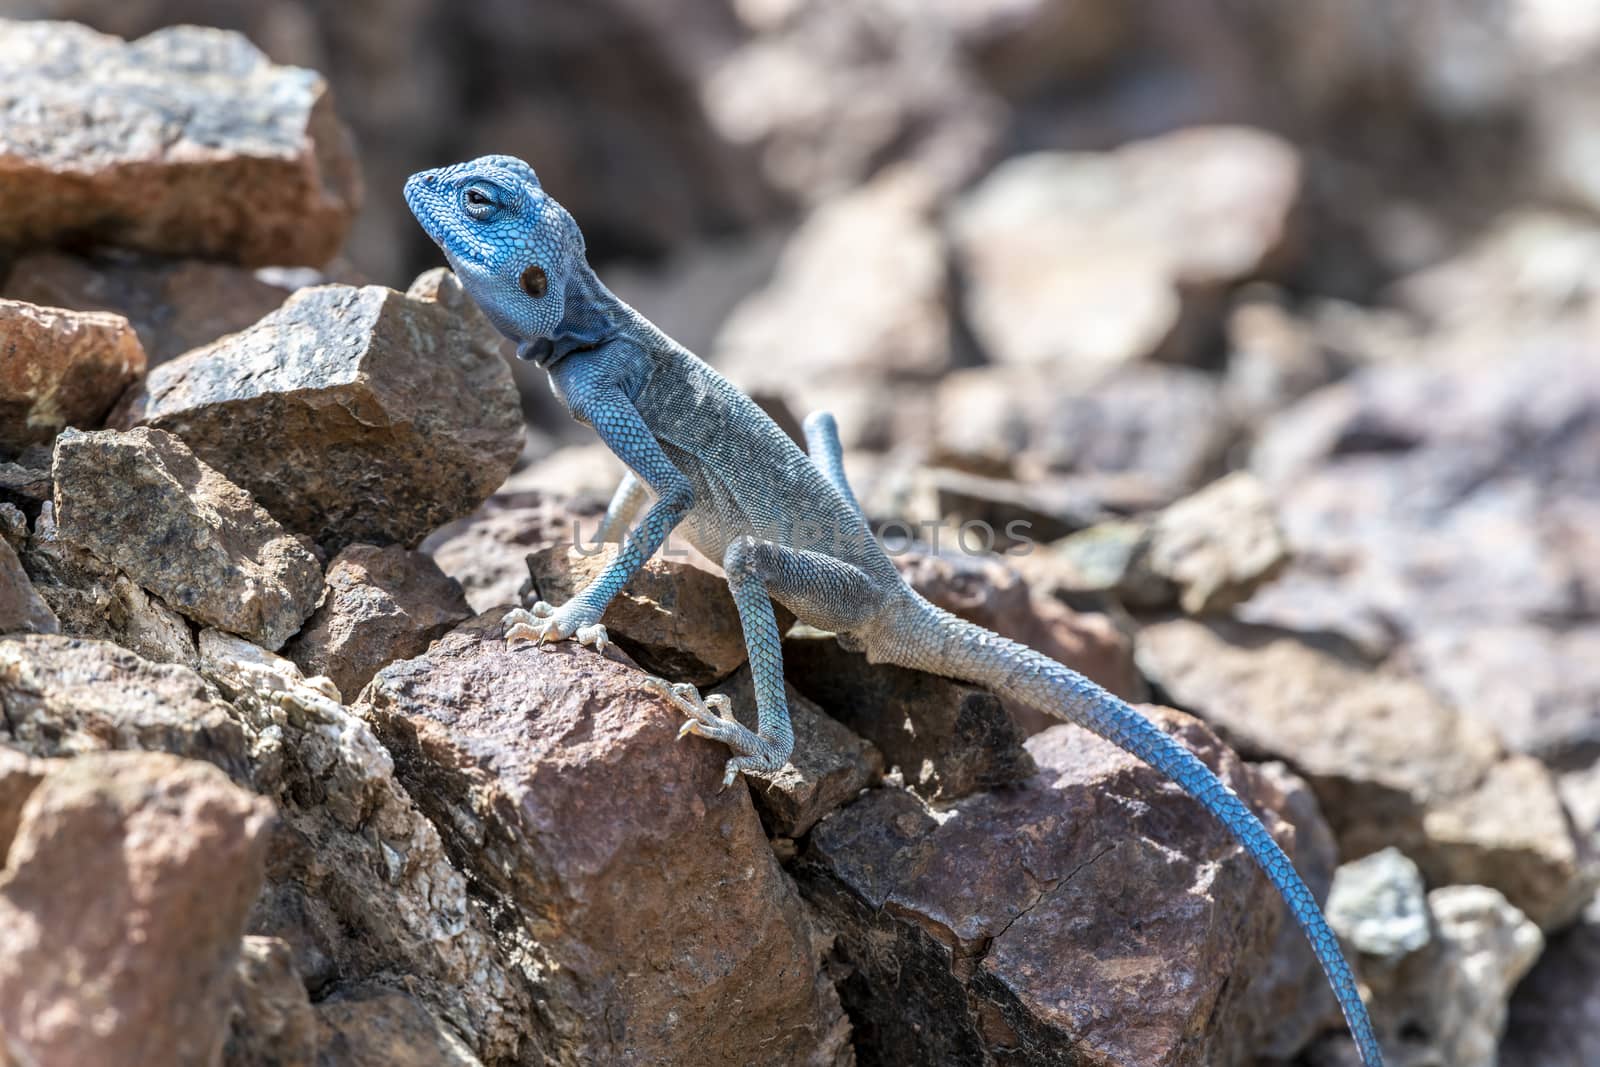 Male Sinai Agama (Pseudotrapelus sinaitus) with his sky-blue coloration and in his rocky habitat, found in the Mountains of Ras Al Khaimah near Showka, United Arab Emirates (UAE), Middle East